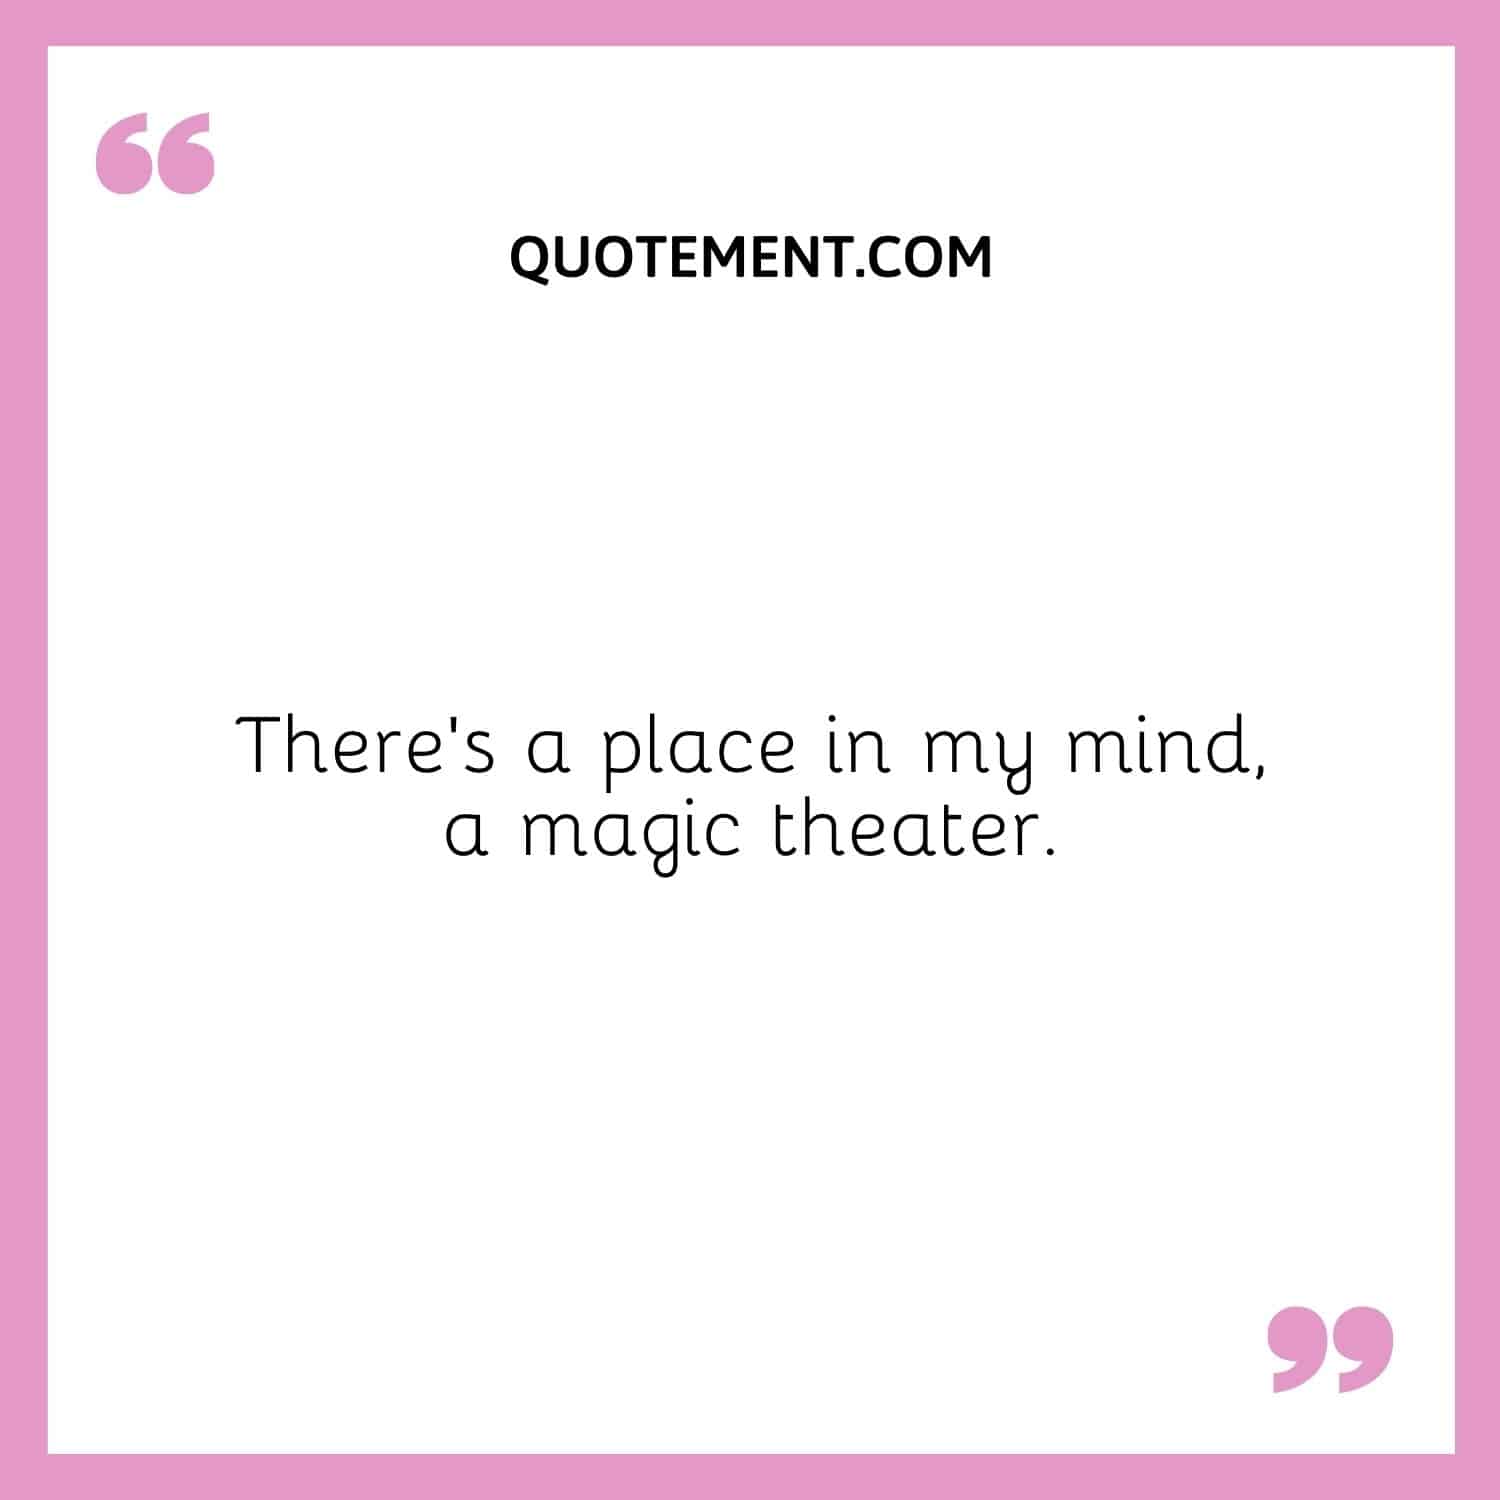 There’s a place in my mind, a magic theater.